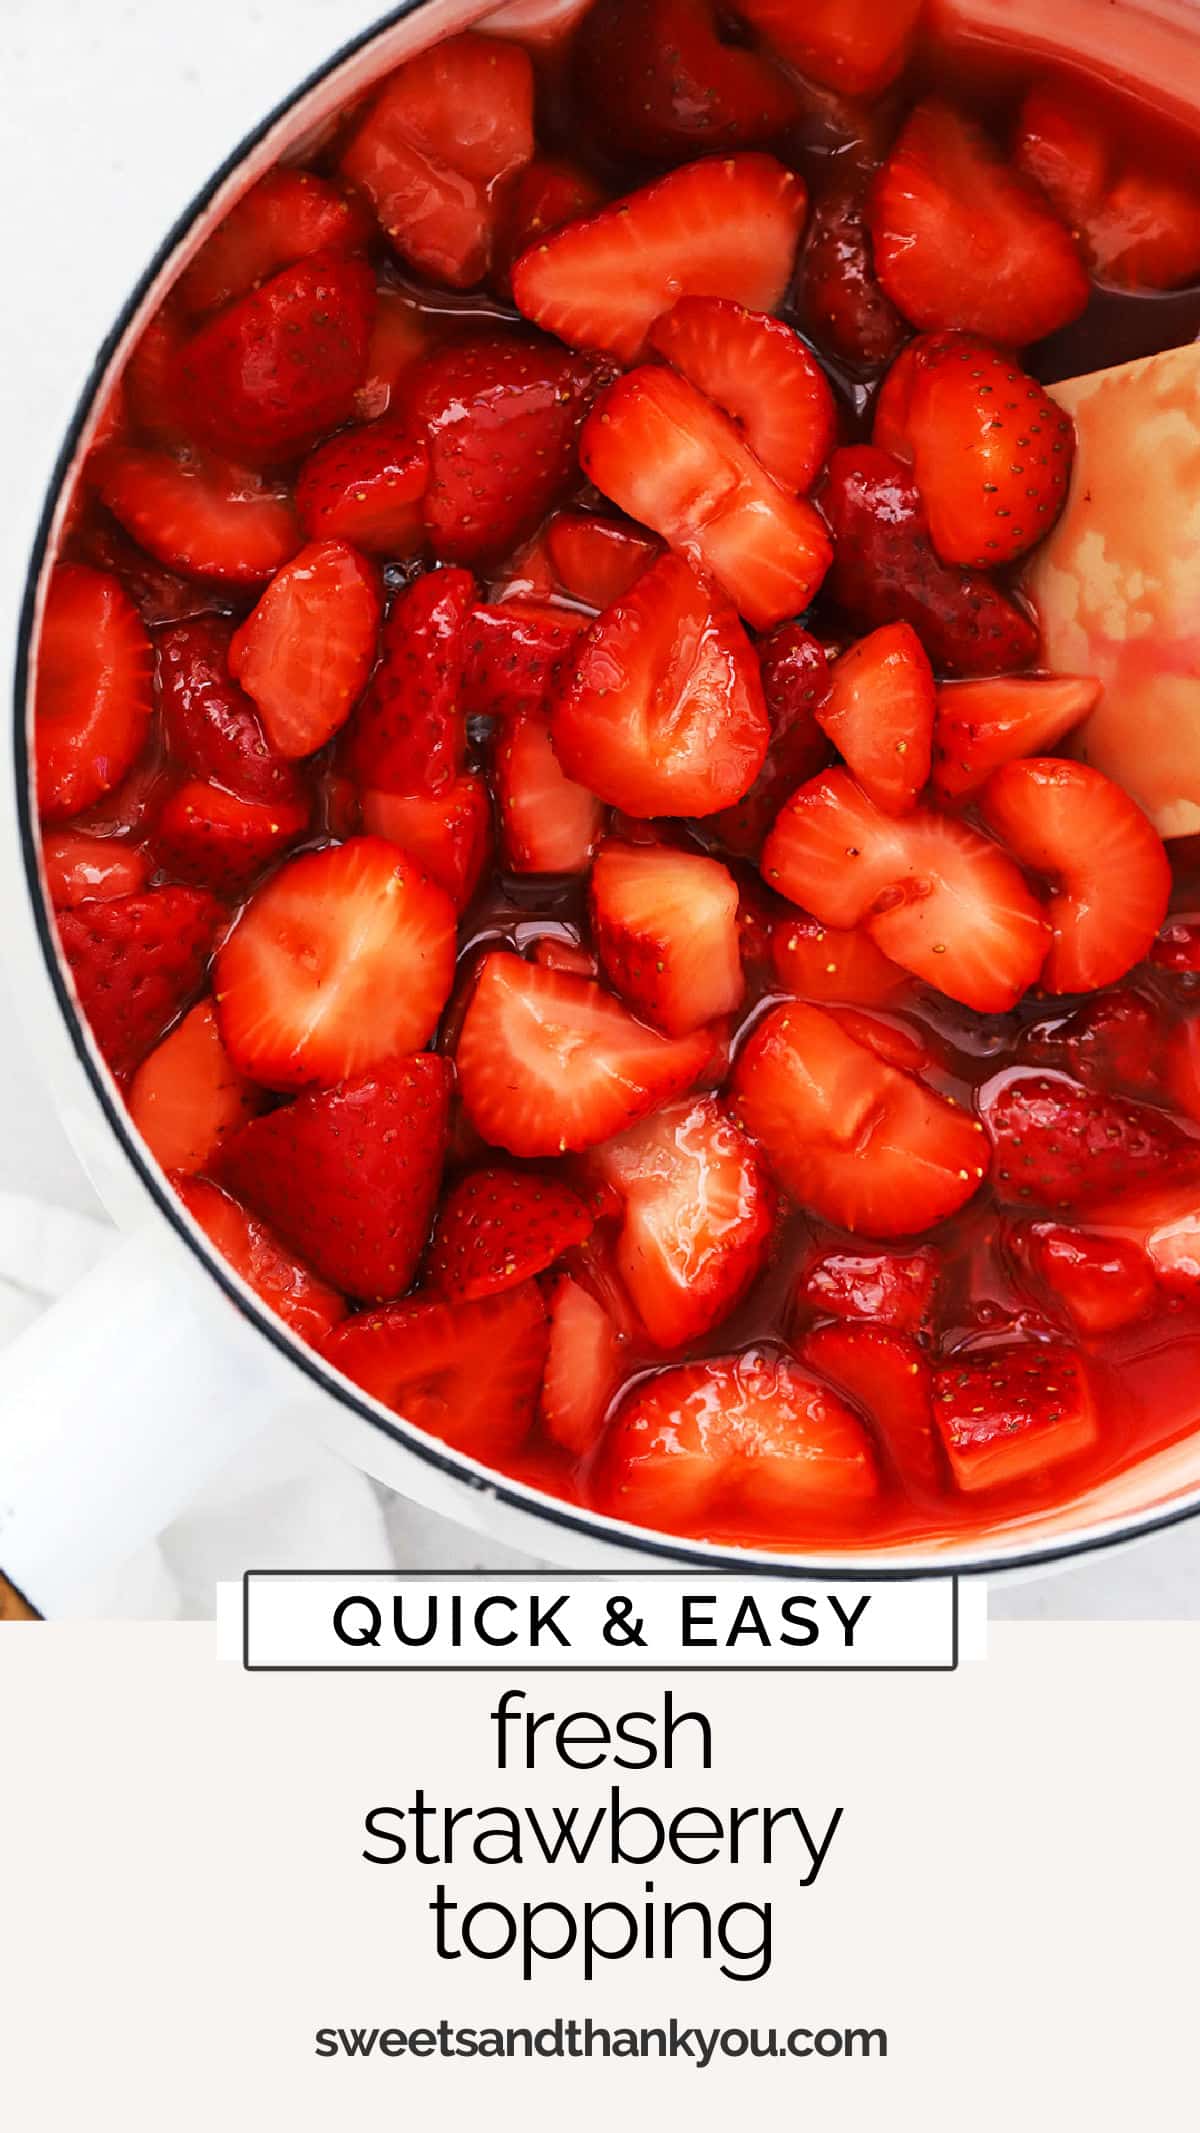 This quick & easy strawberry topping recipe is the perfect sauce for cheesecake, ice cream, waffles, strawberry shortcake, and more! / easy strawberry sauce for cheesecake / strawberry sauce for ice cream / easy strawberry topping for cheesecake / strawberry topping for angel food cake / smooth strawberry sauce recipe / how to make strawberry sauce / 